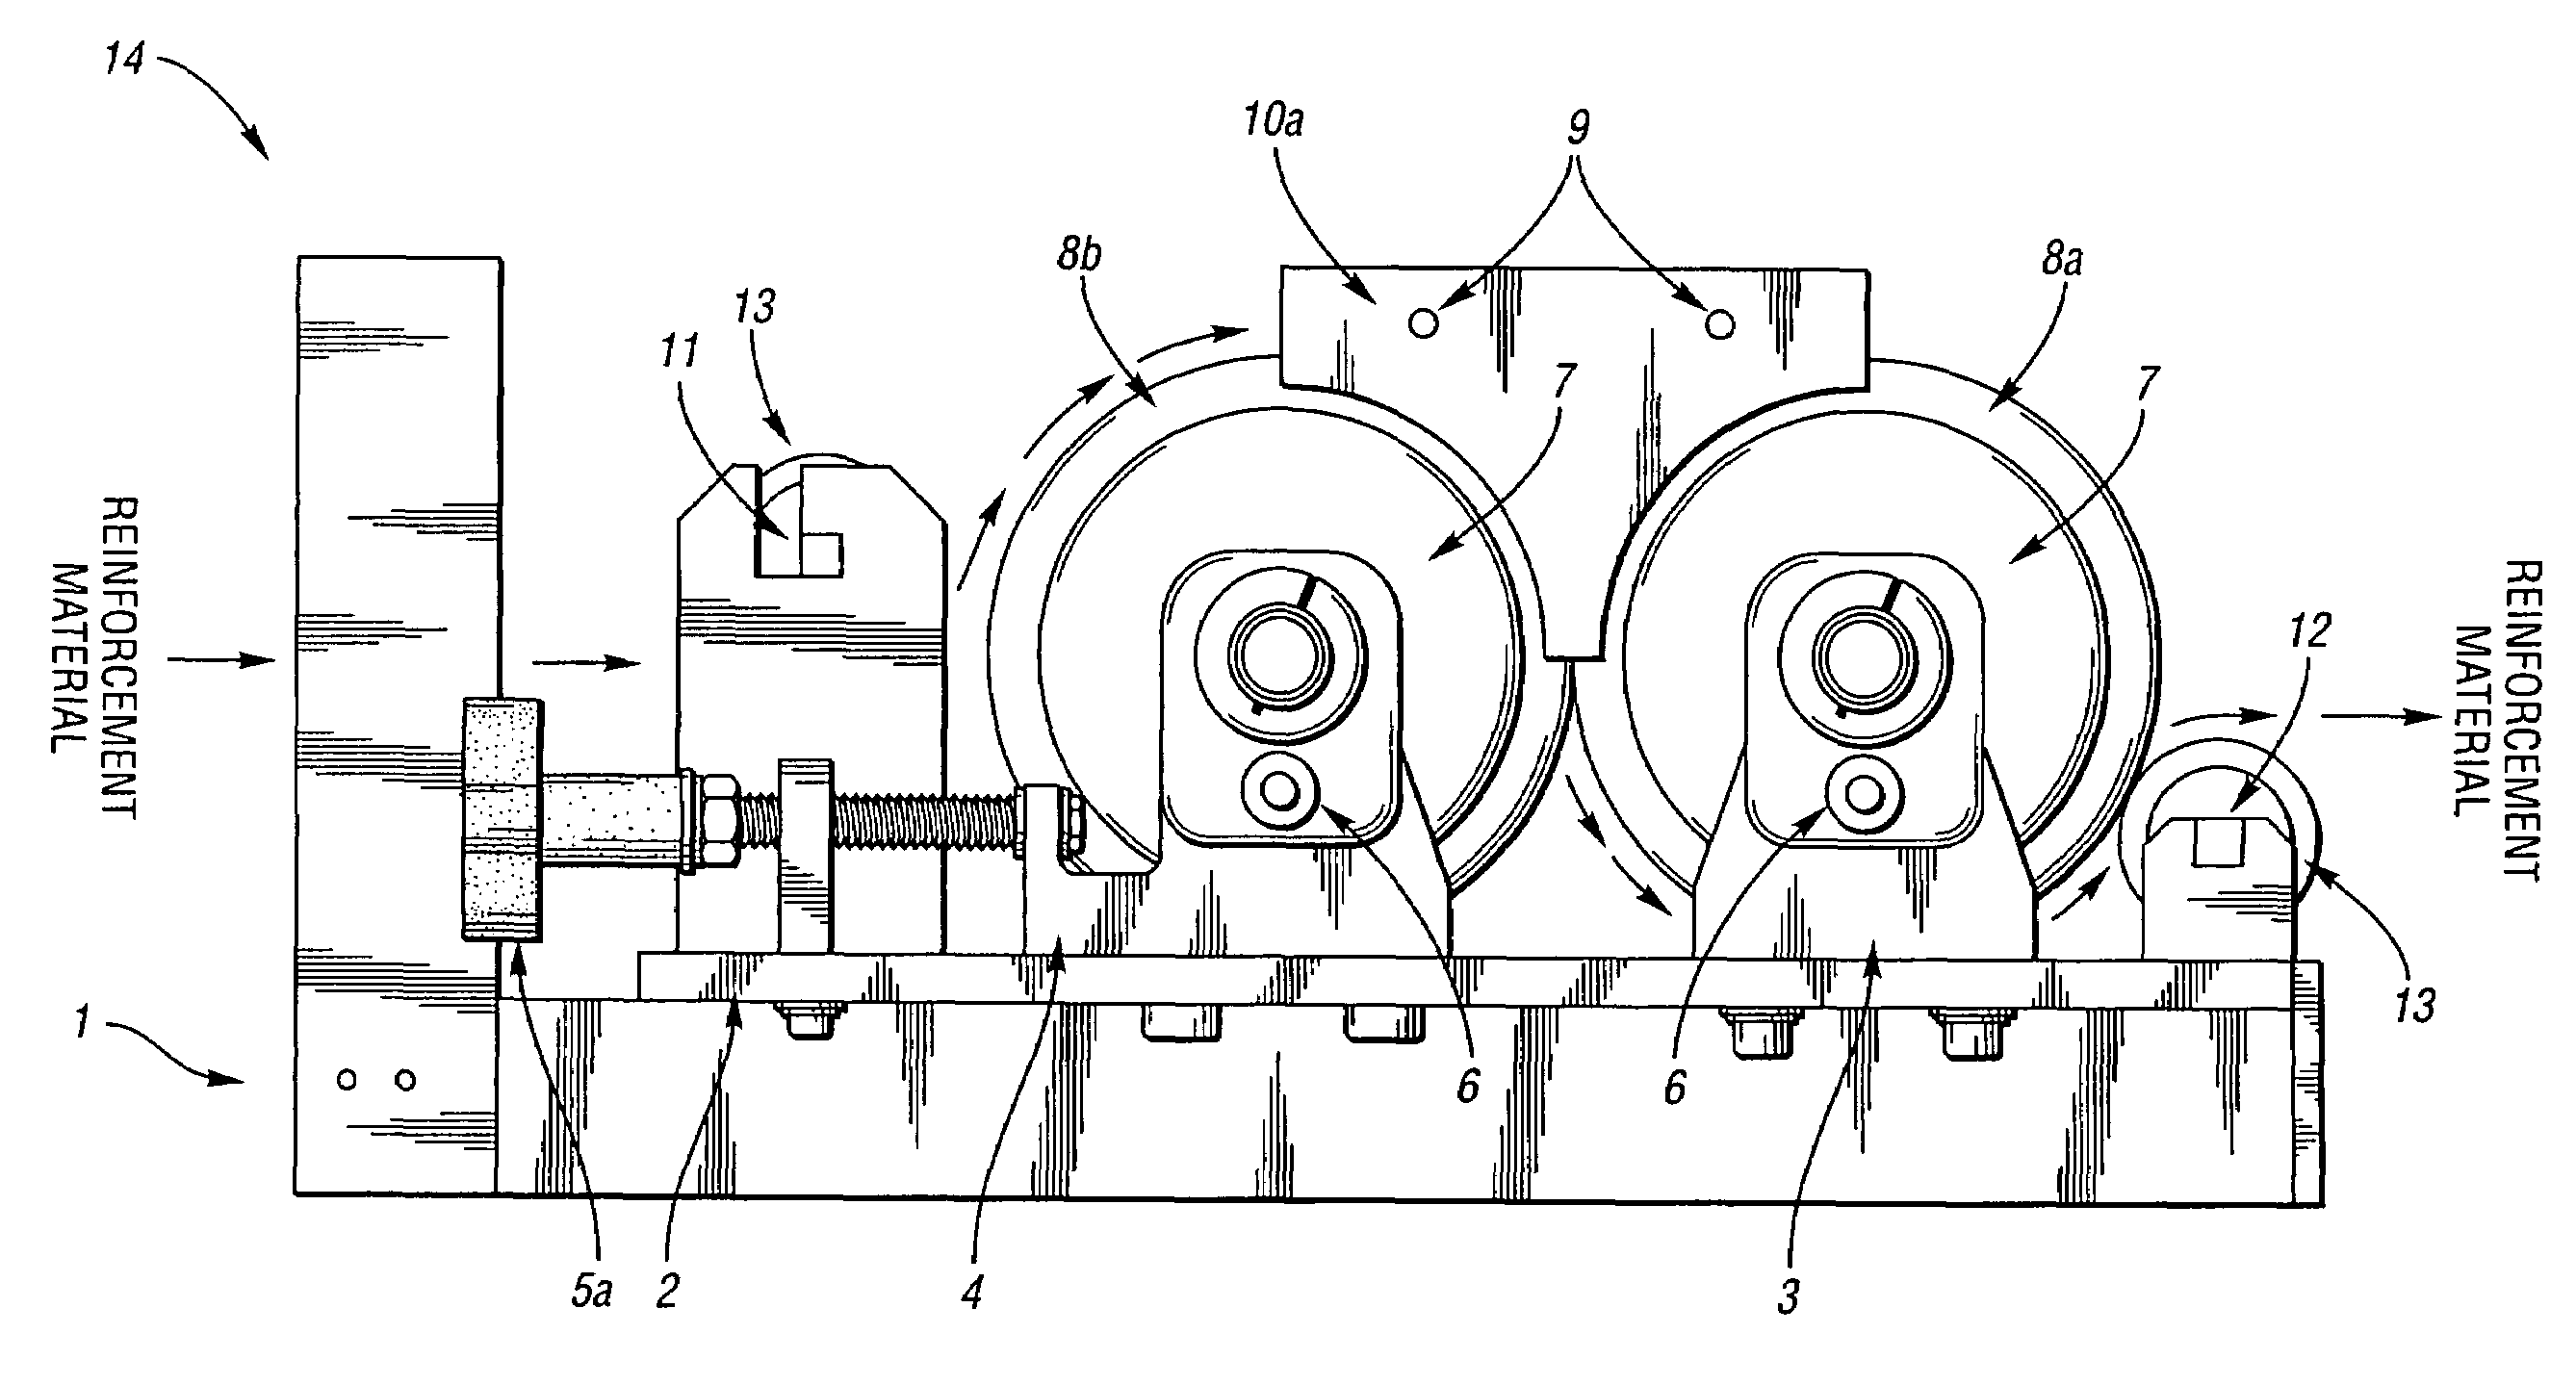 Apparatus for resin-impregnation of fibers for filament winding